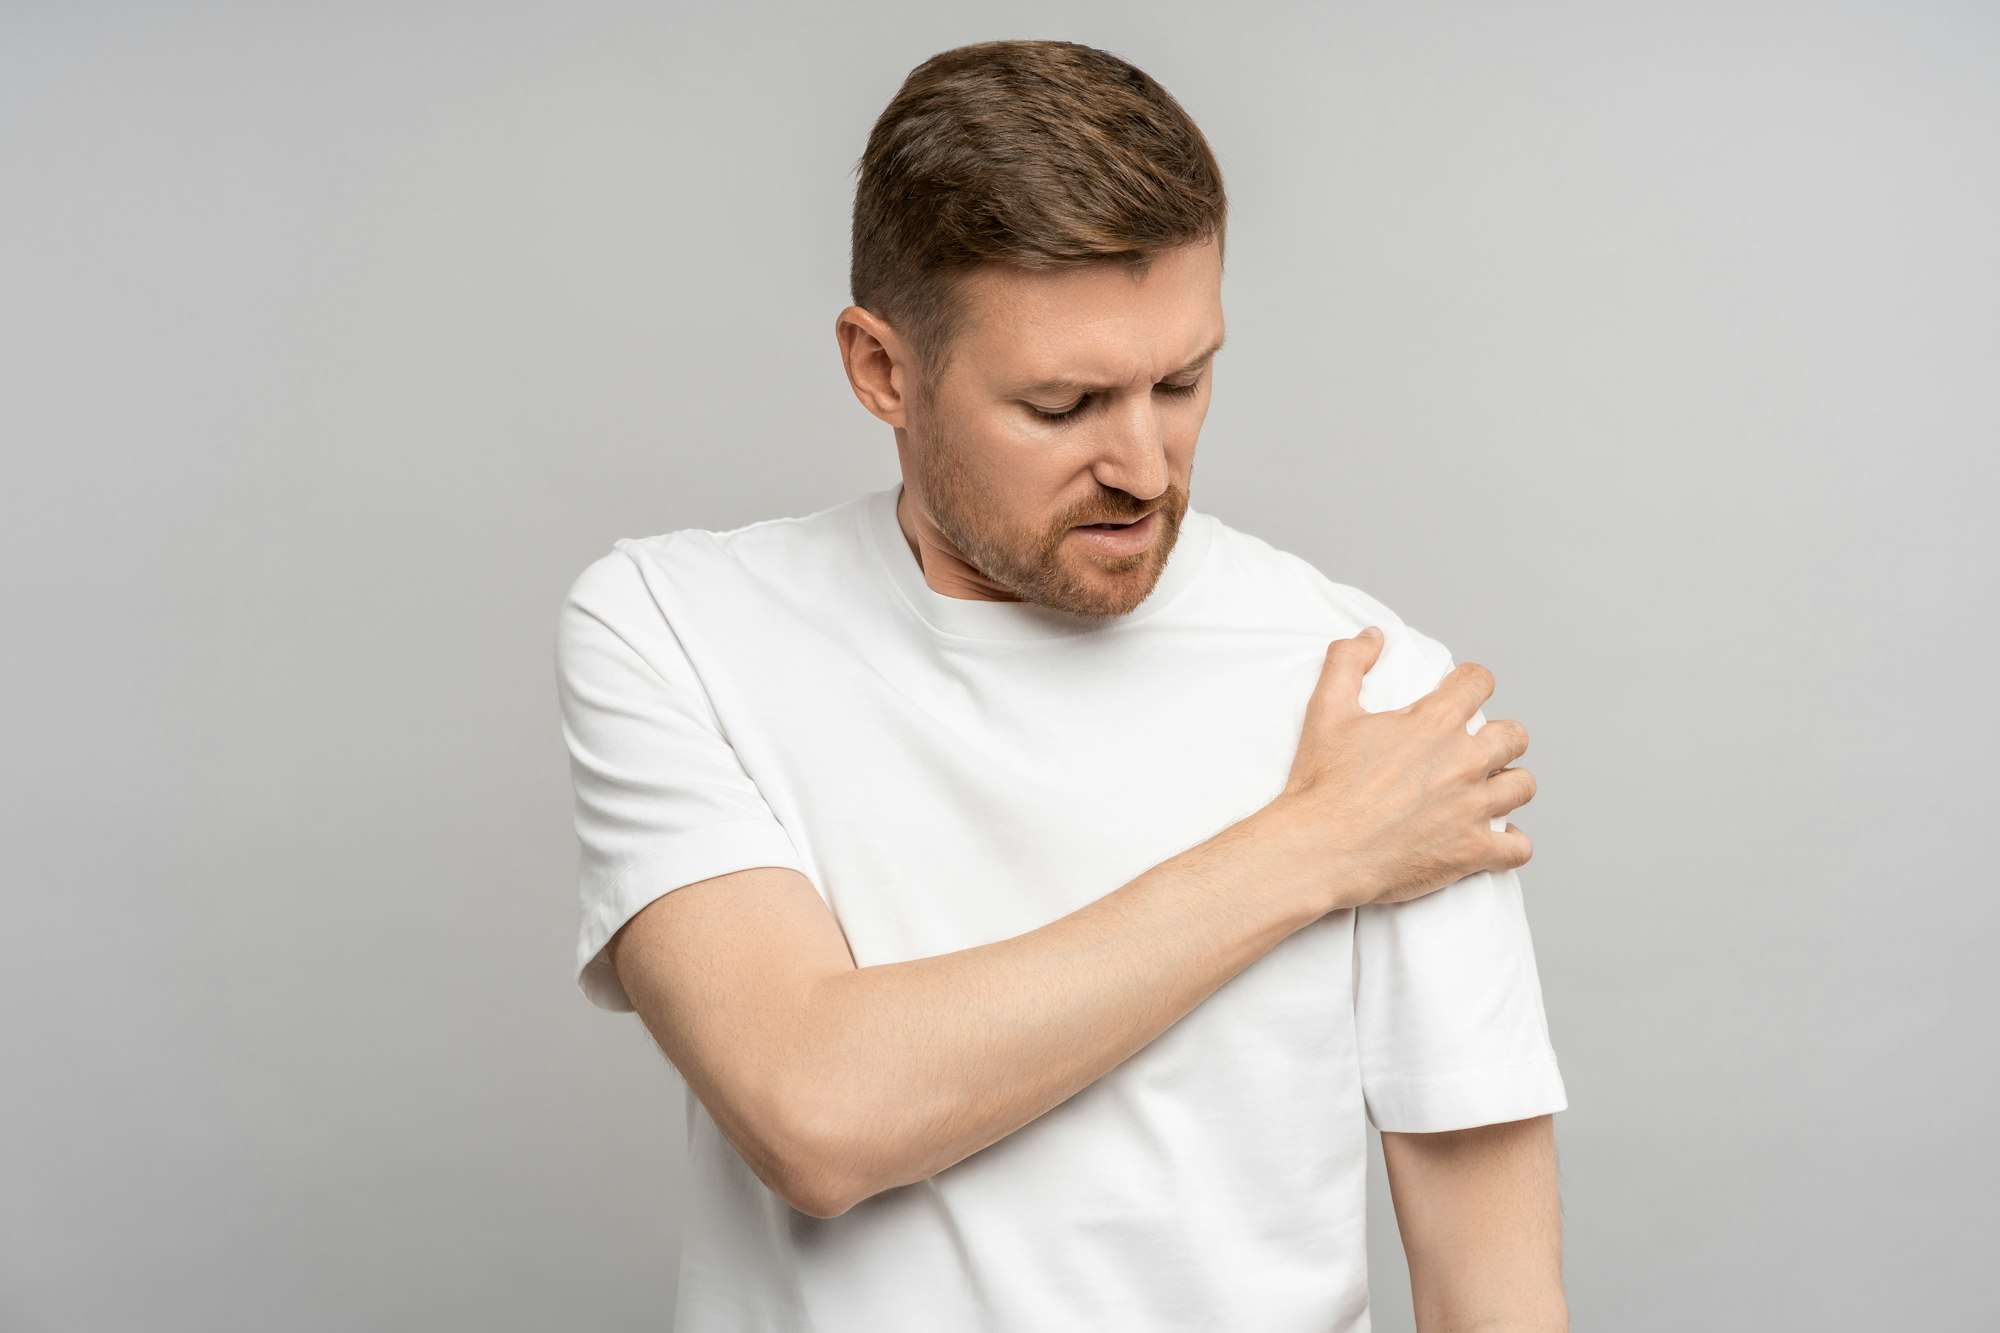 Unhealthy man holds on to sore shoulder. Guy experiences throb pain in ligaments, suffers discomfort